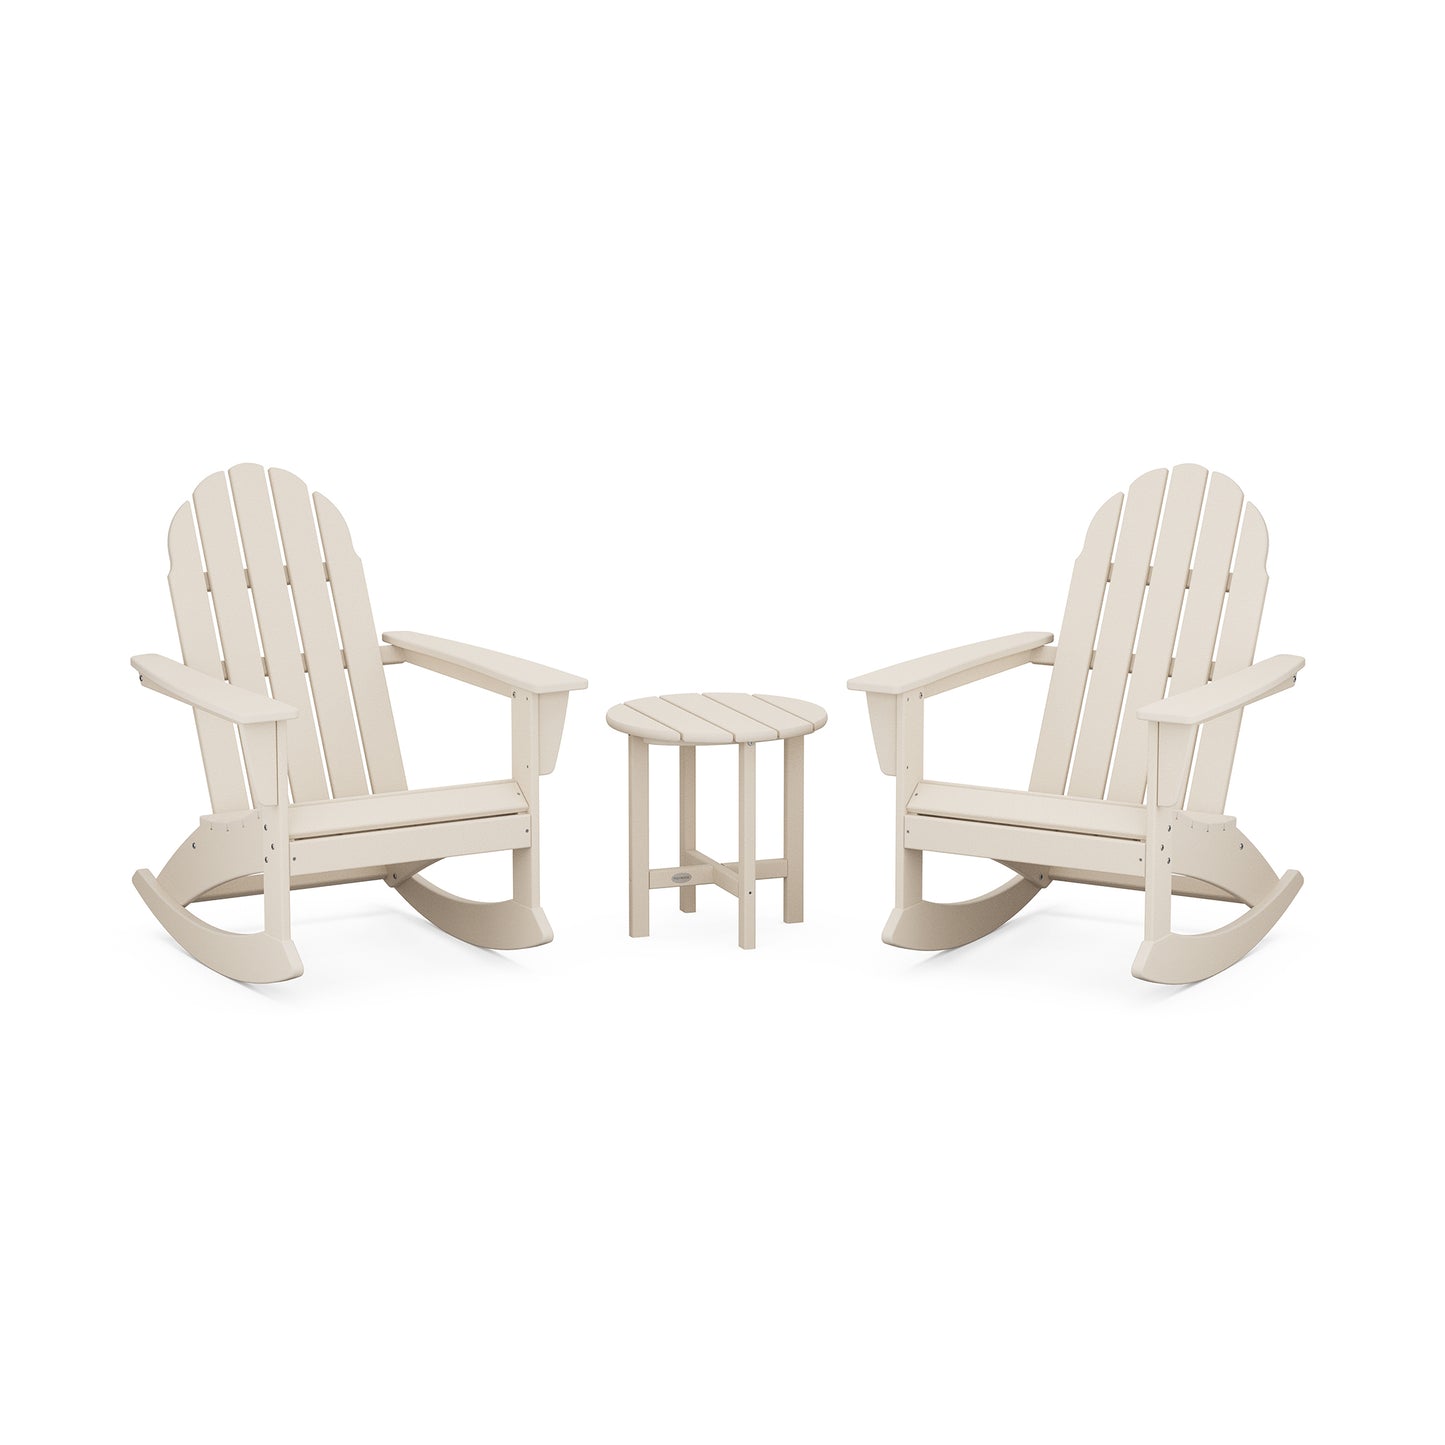 Two beige POLYWOOD Vineyard 3-Piece Adirondack Rocking Chair Sets facing each other with a small round table between them, set against a plain white background.